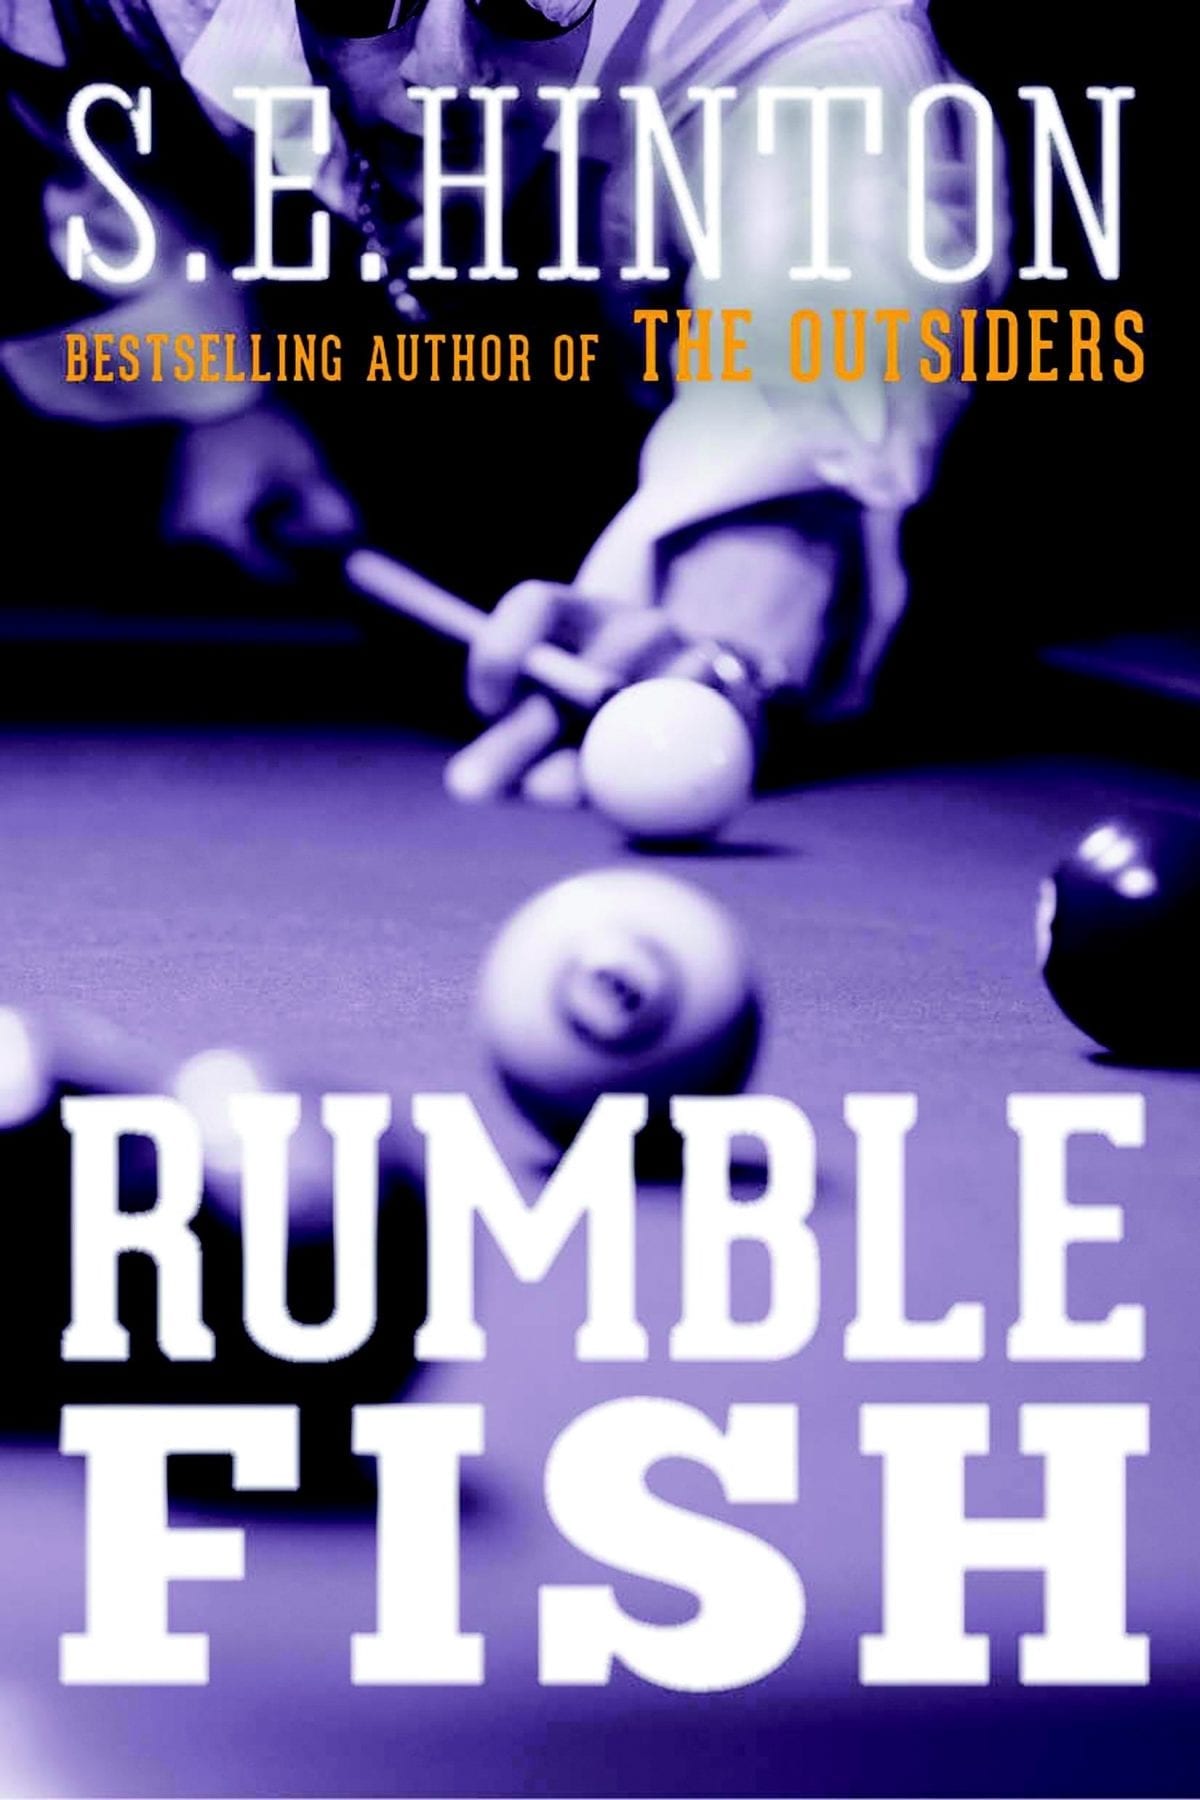 Rumble Fish by S.E. Hinton